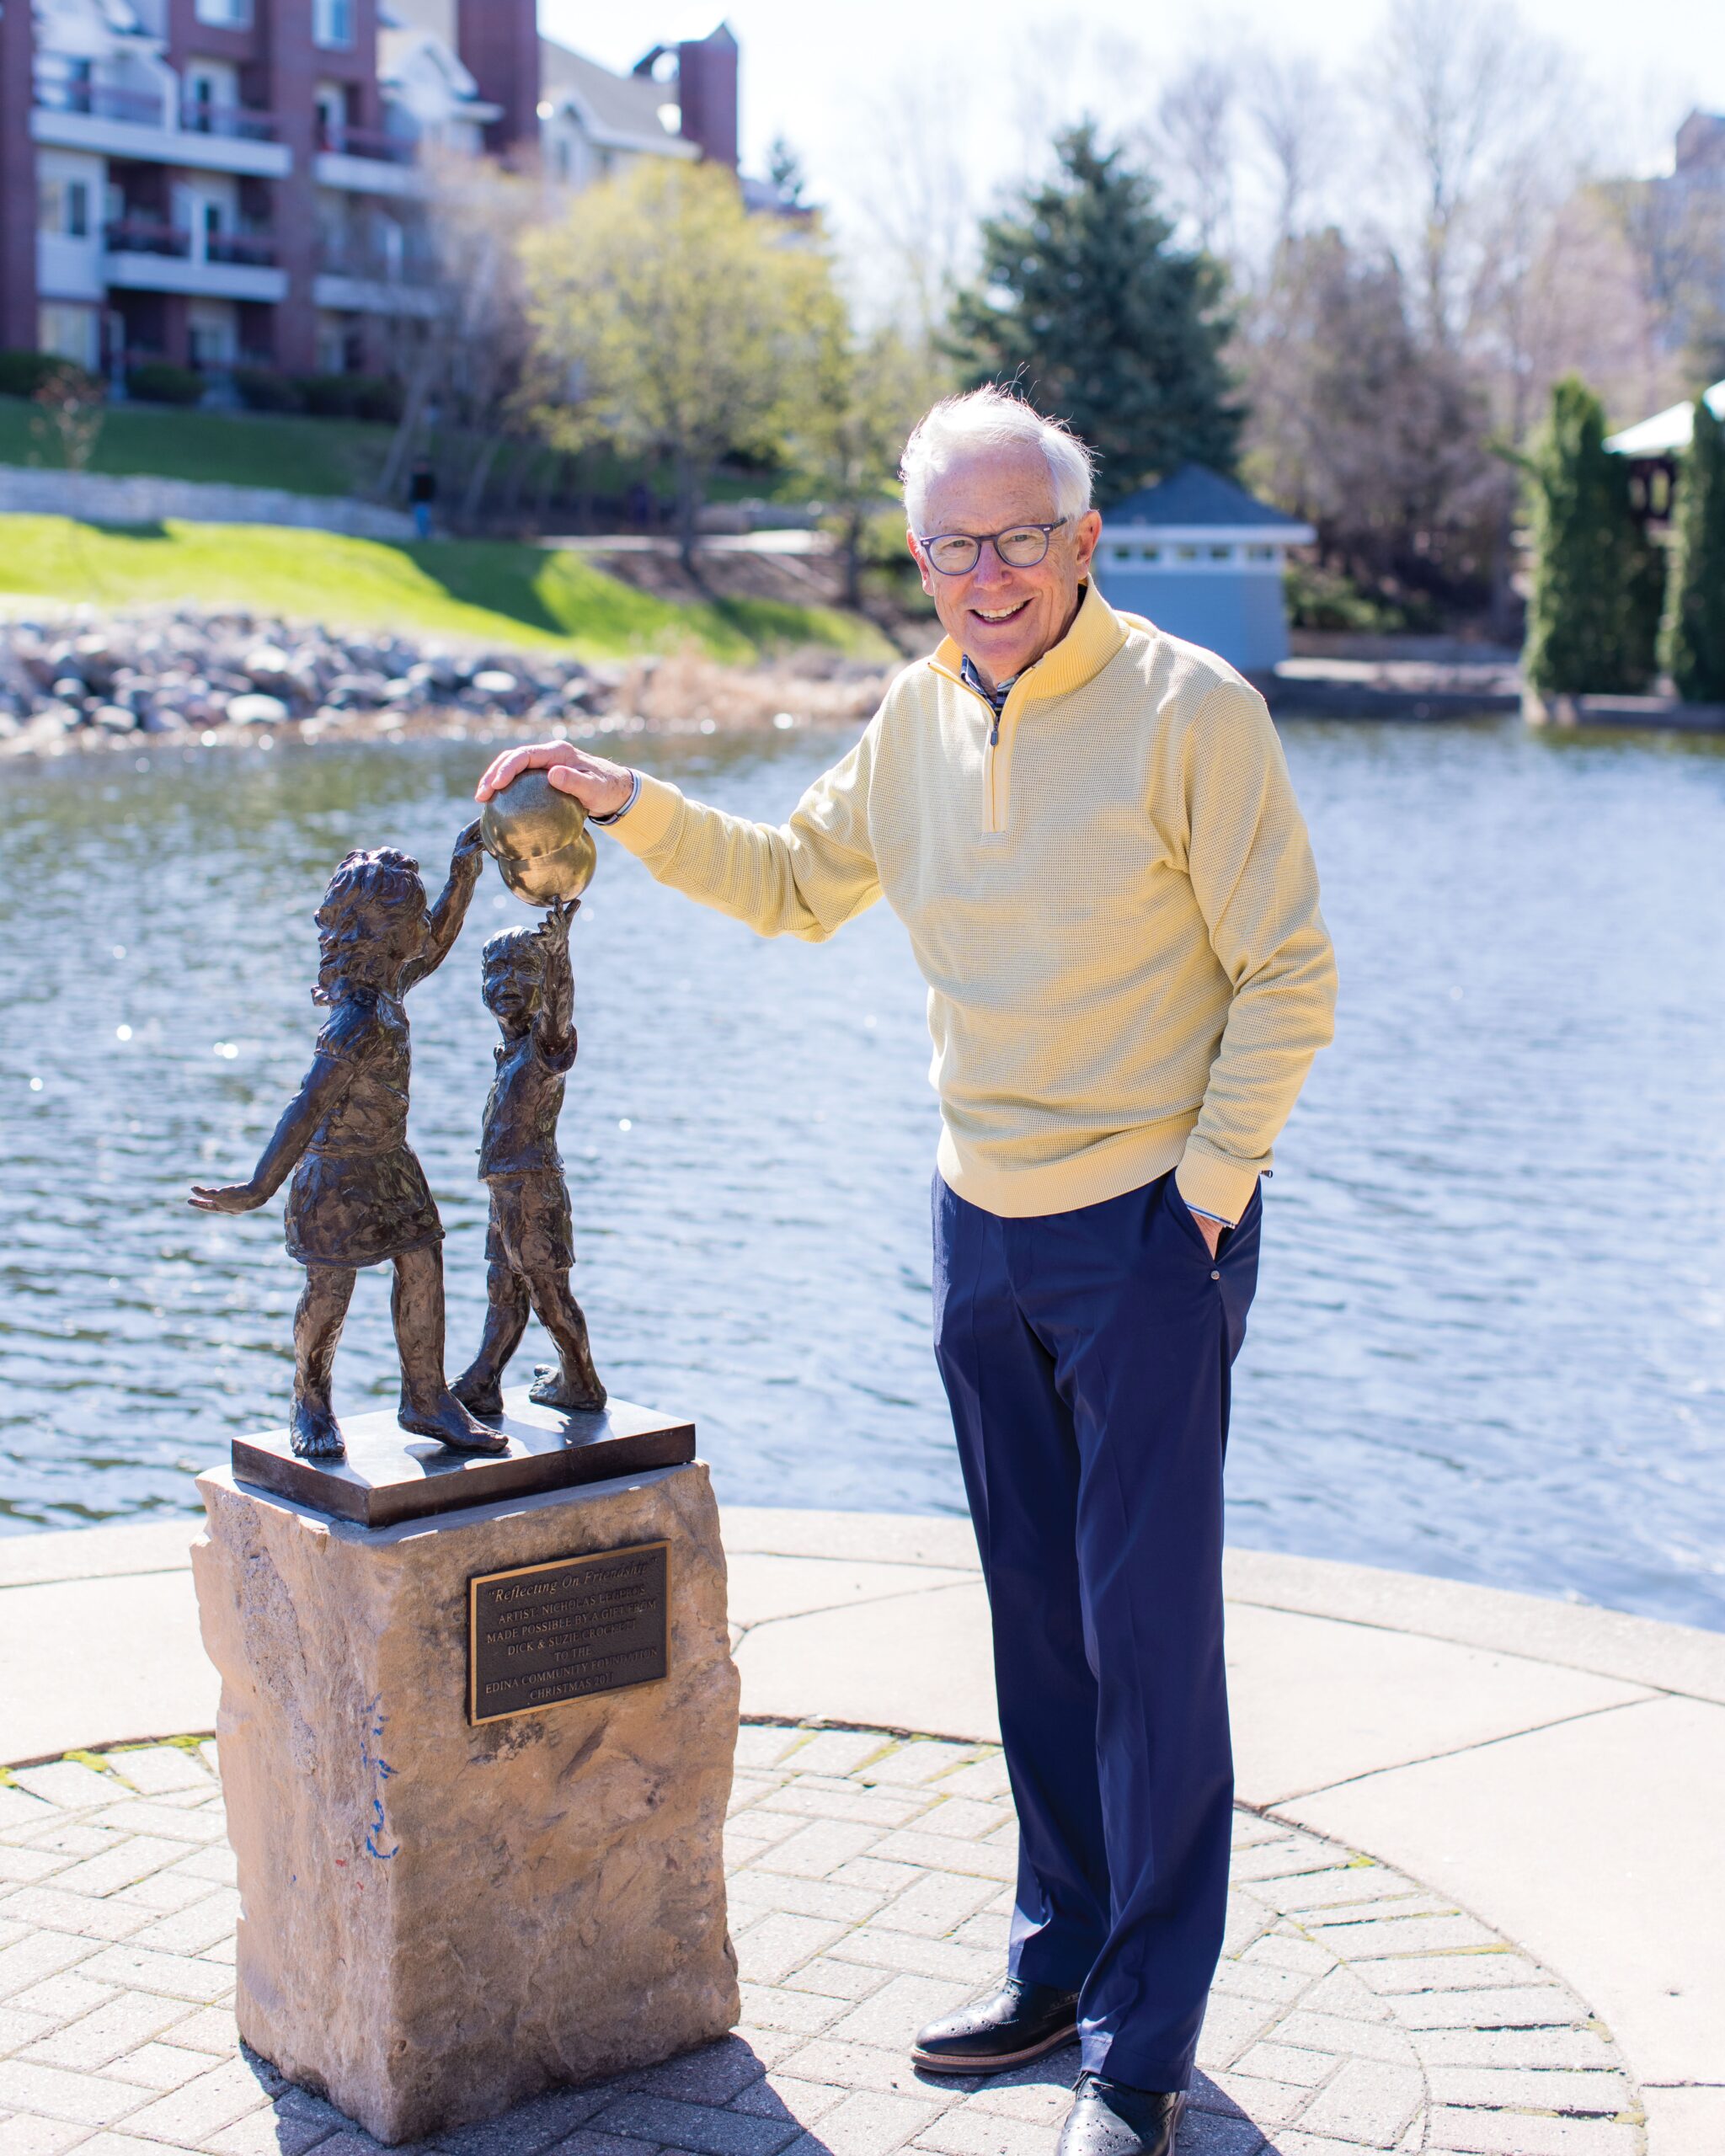 One of Dick Crockett’s many legacies is enriching Edina with art such as this sculpture in Centennial Lakes Park. Photo: Chris Emeott